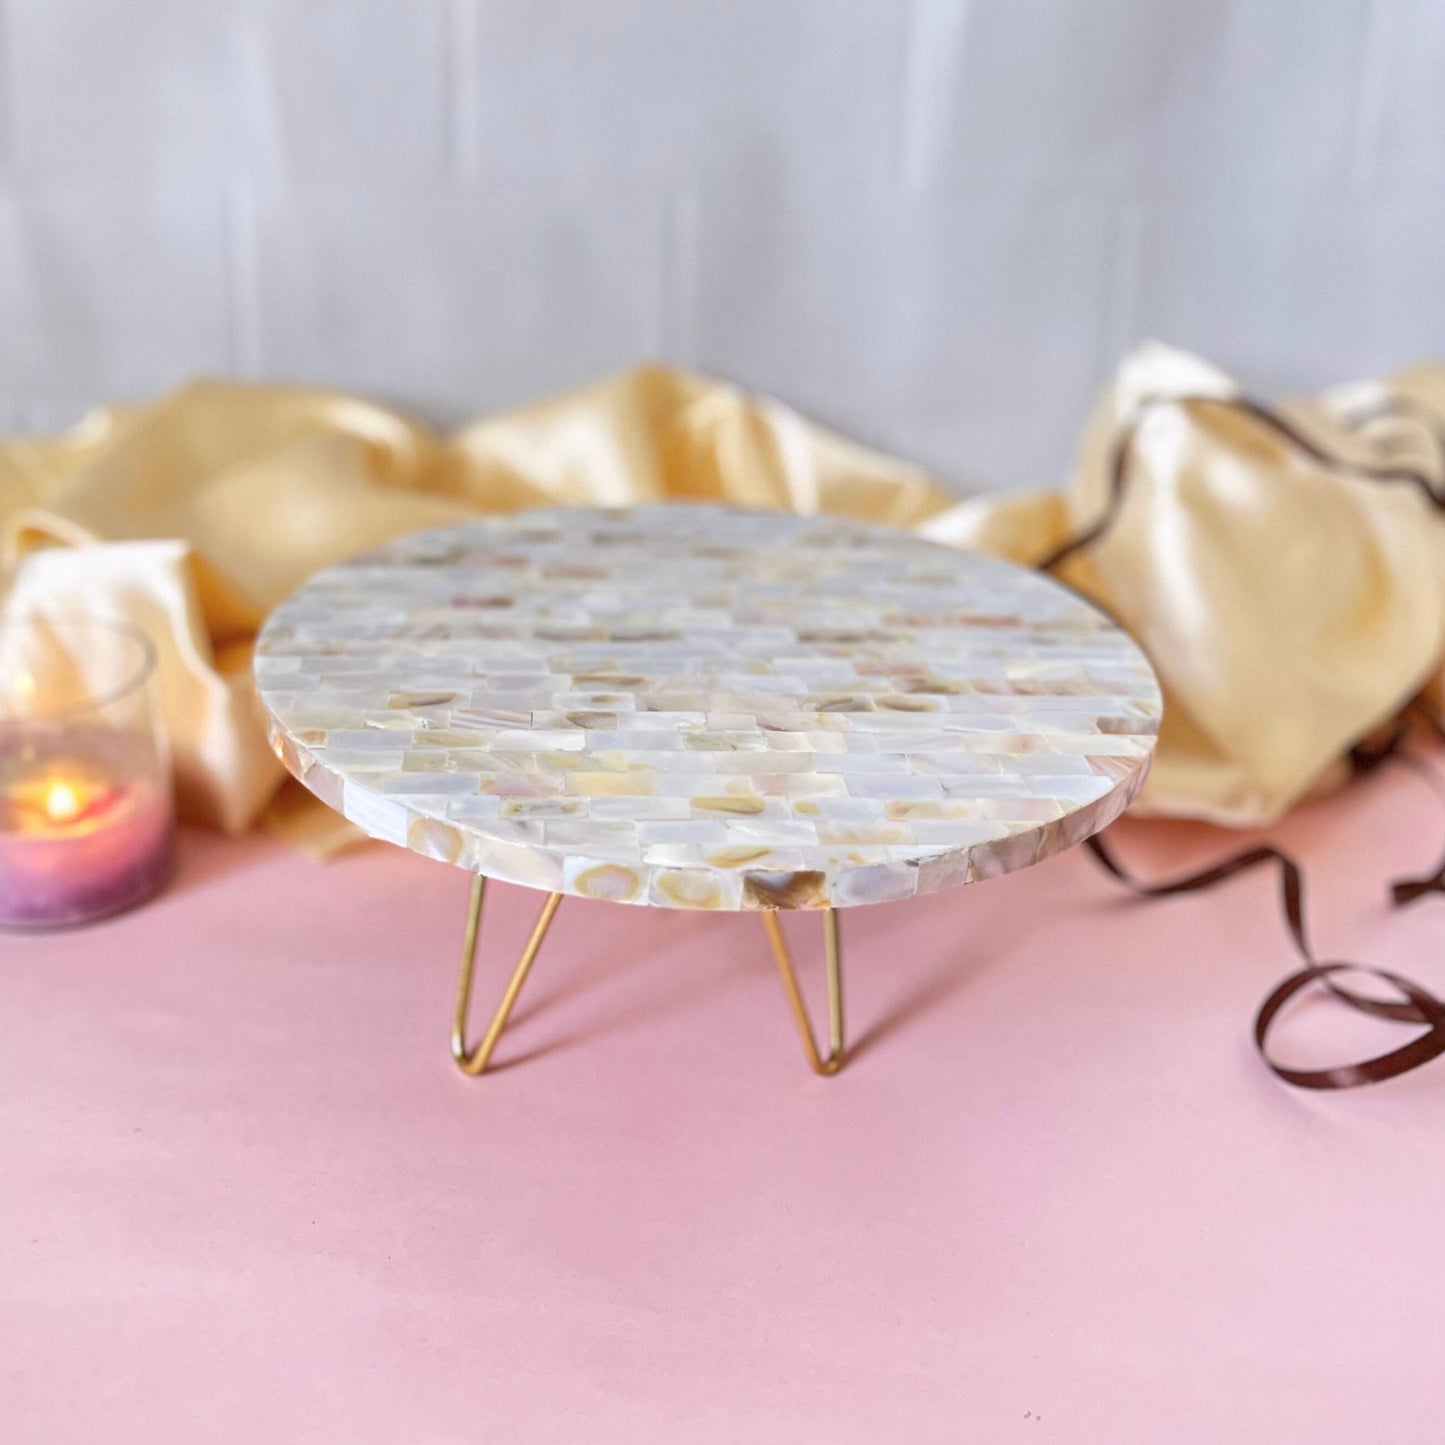 Round Mother Of Pearl Cake Stand with Metal Stand Cupcake Display Stand for Dessert Weddings Birthdays and Multipurpose - White